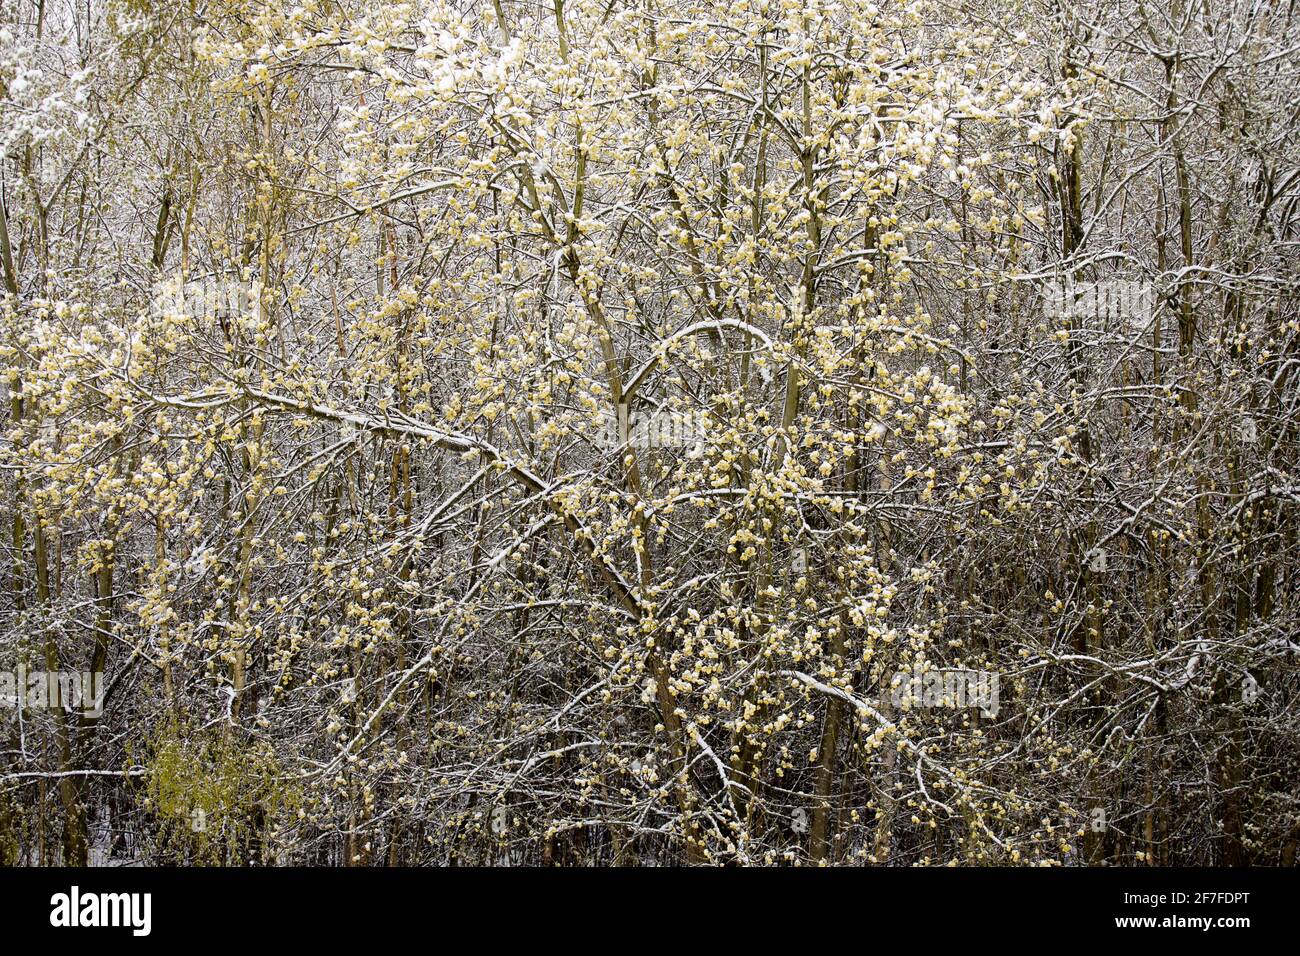 Snow falling on emerging leaves of trees in the Netherlands in april Stock Photo